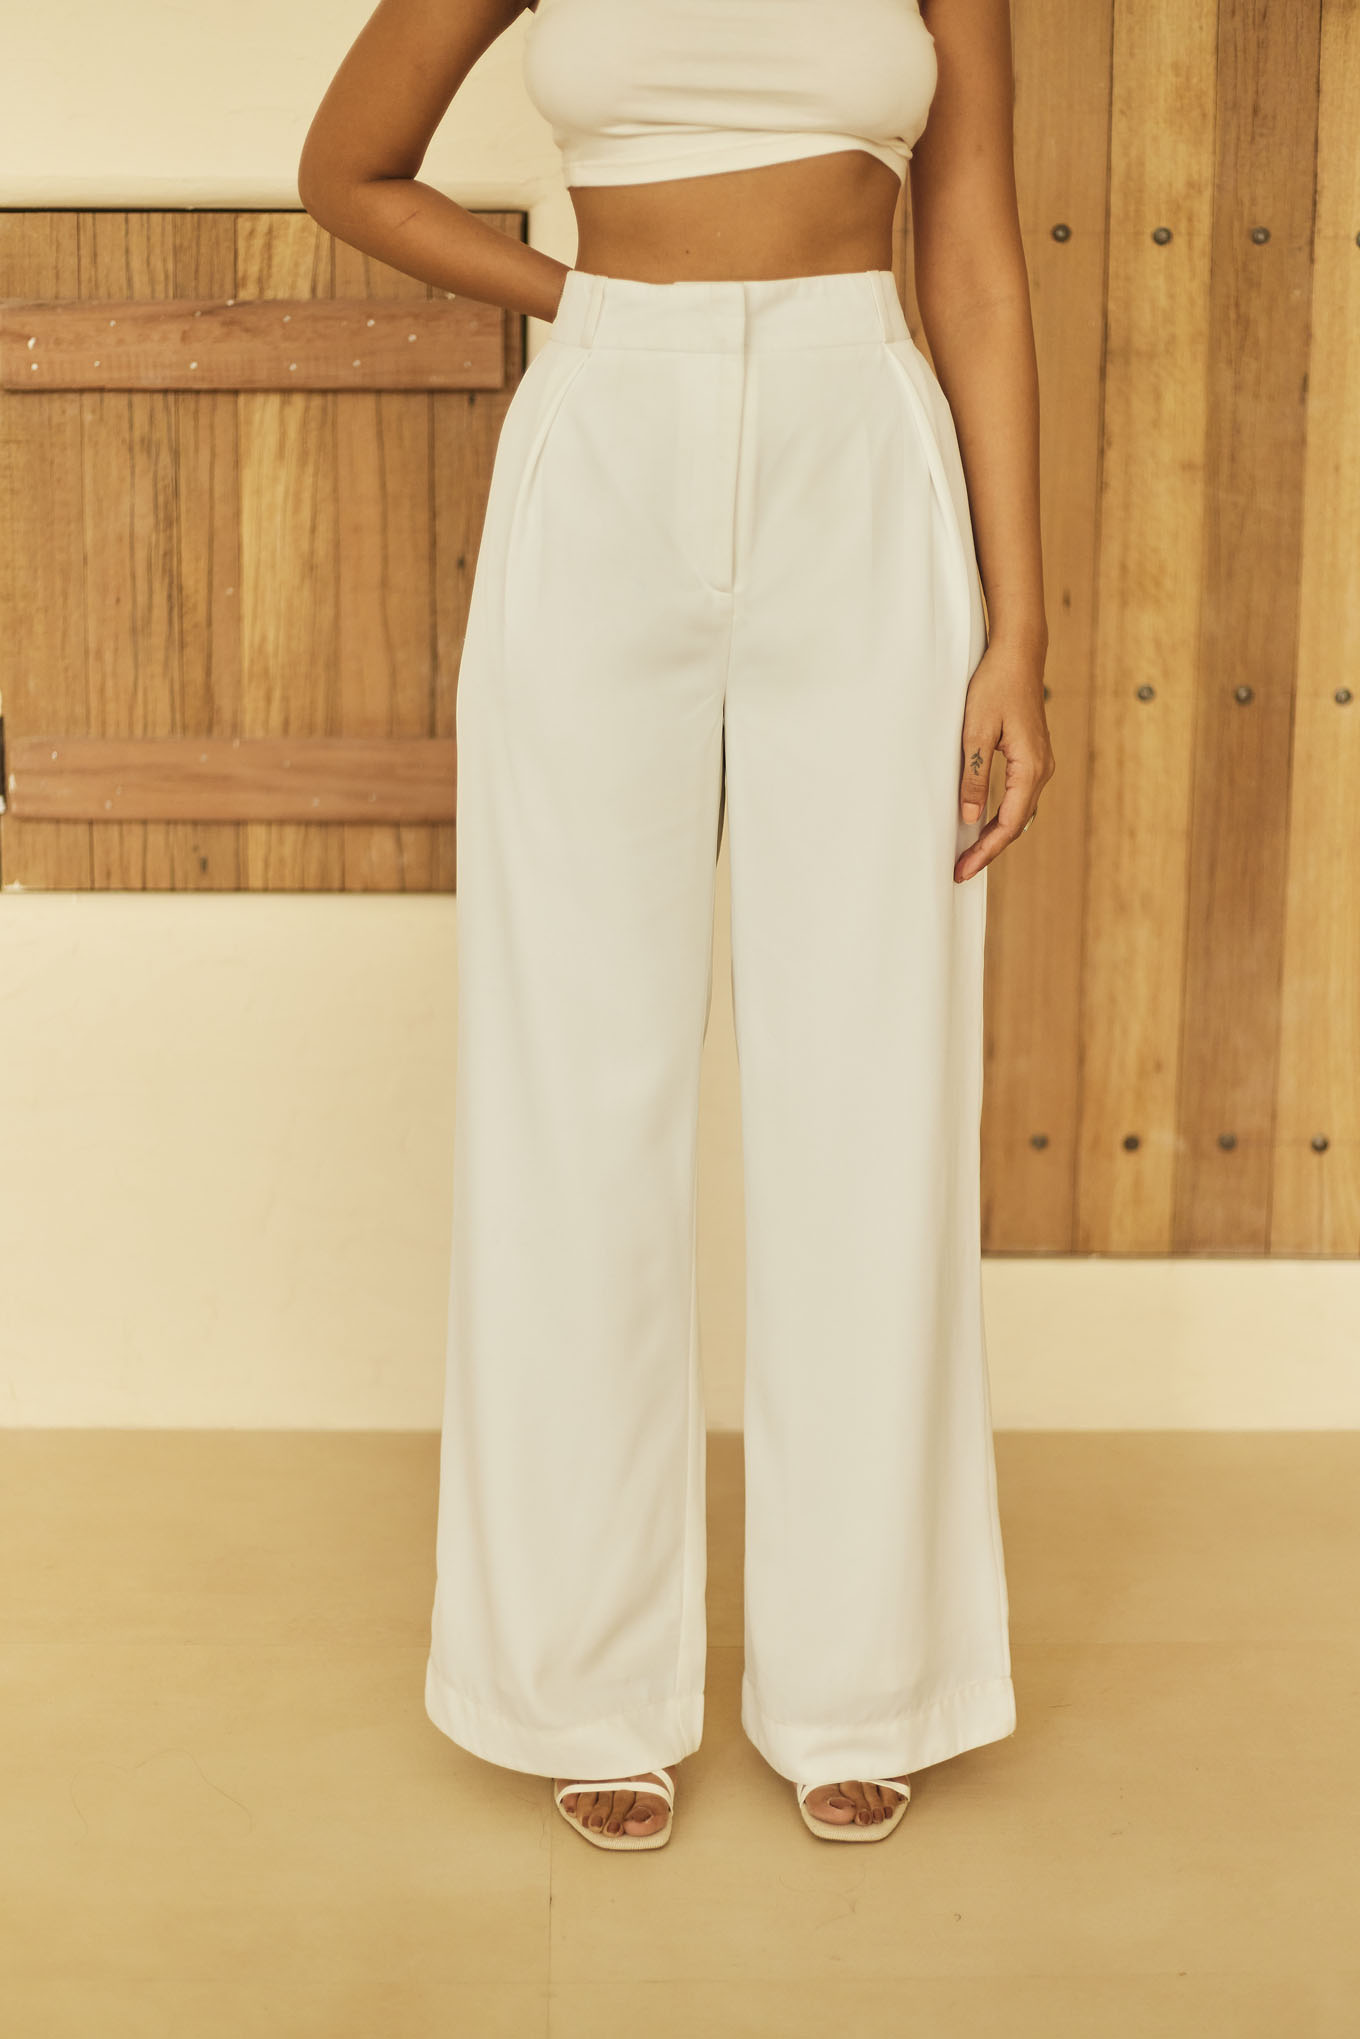 Knot-back top and pants set in Vanilla Heather | VENUS